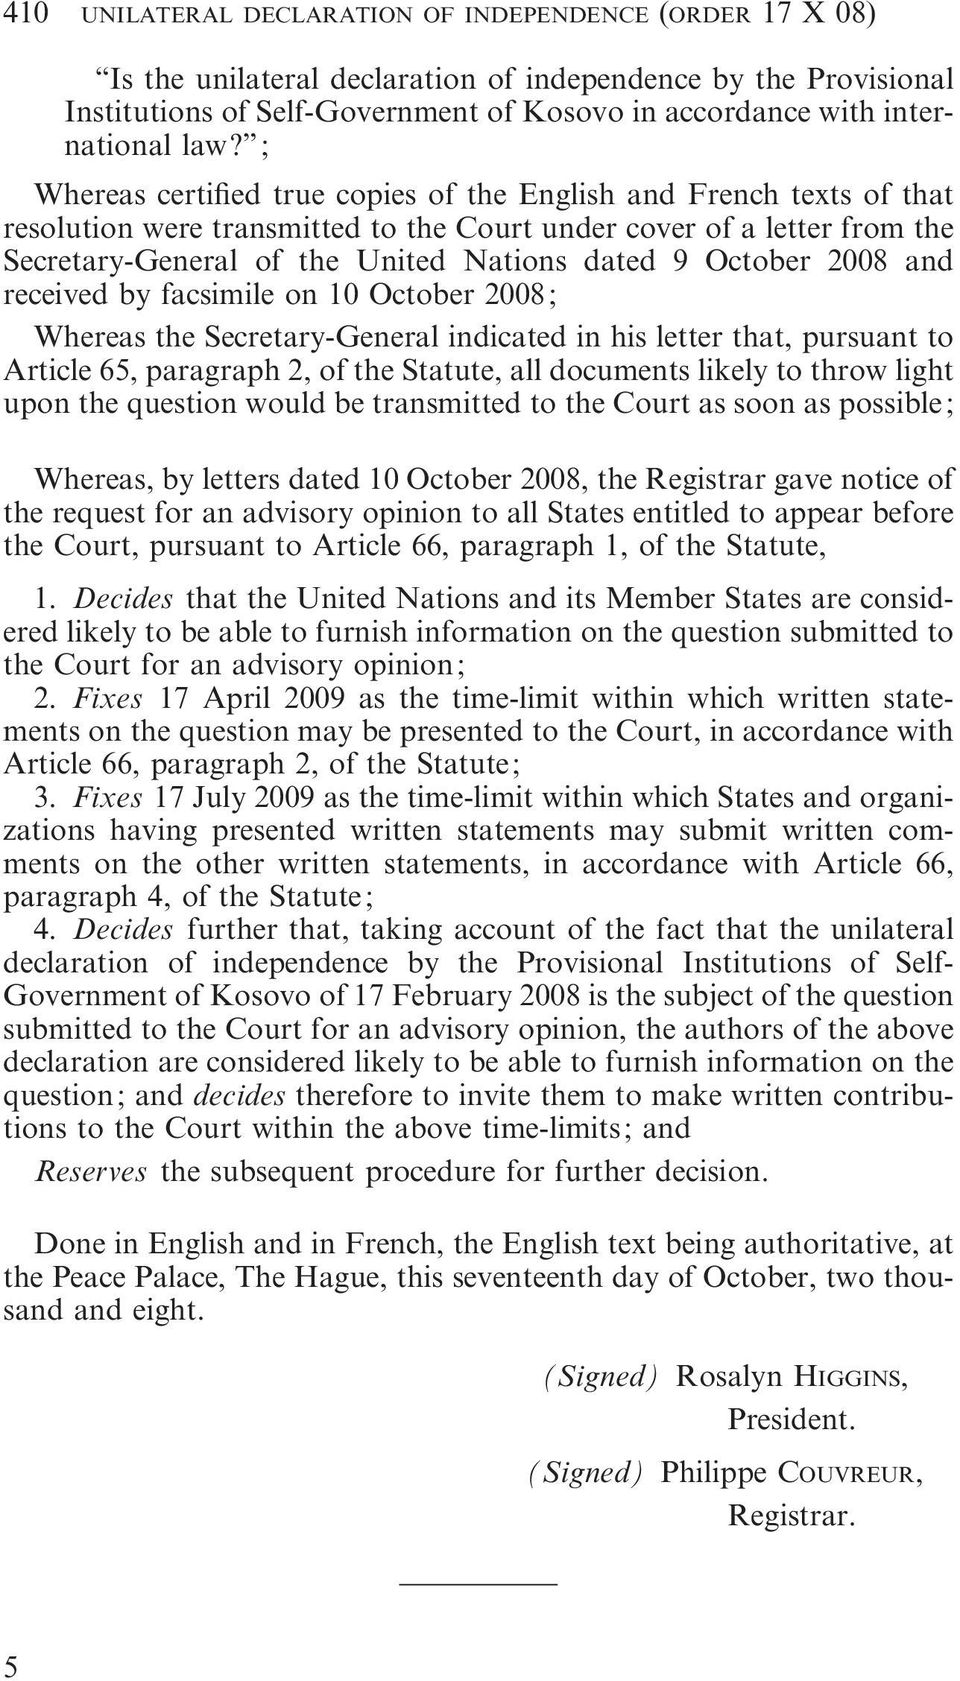 October 2008 and received by facsimile on 10 October 2008; Whereas the Secretary-General indicated in his letter that, pursuant to Article 65, paragraph 2, of the Statute, all documents likely to